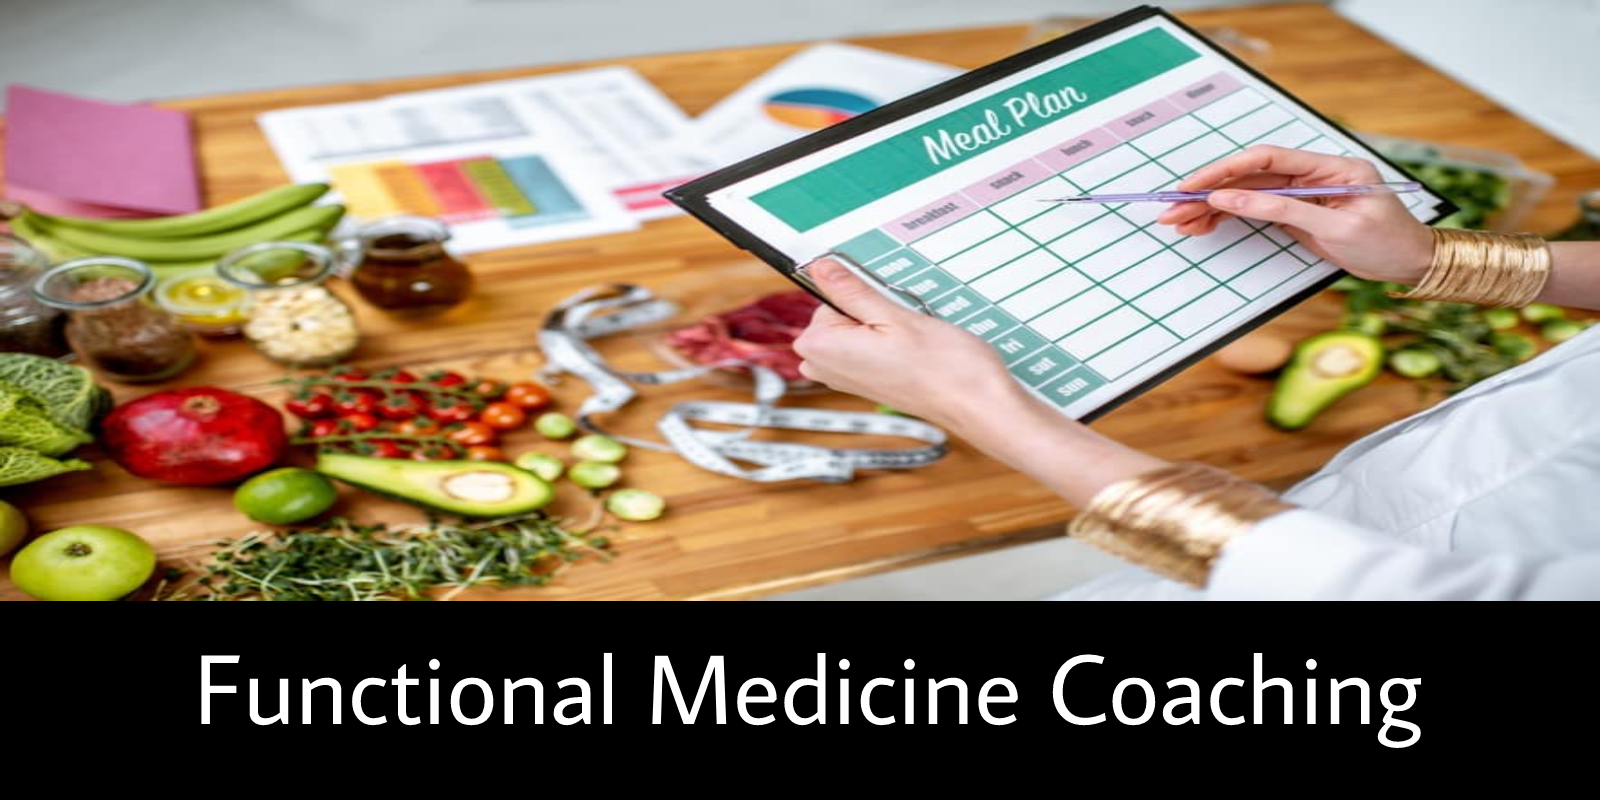 nutrition plan, healthy foods; functional medicine coaching